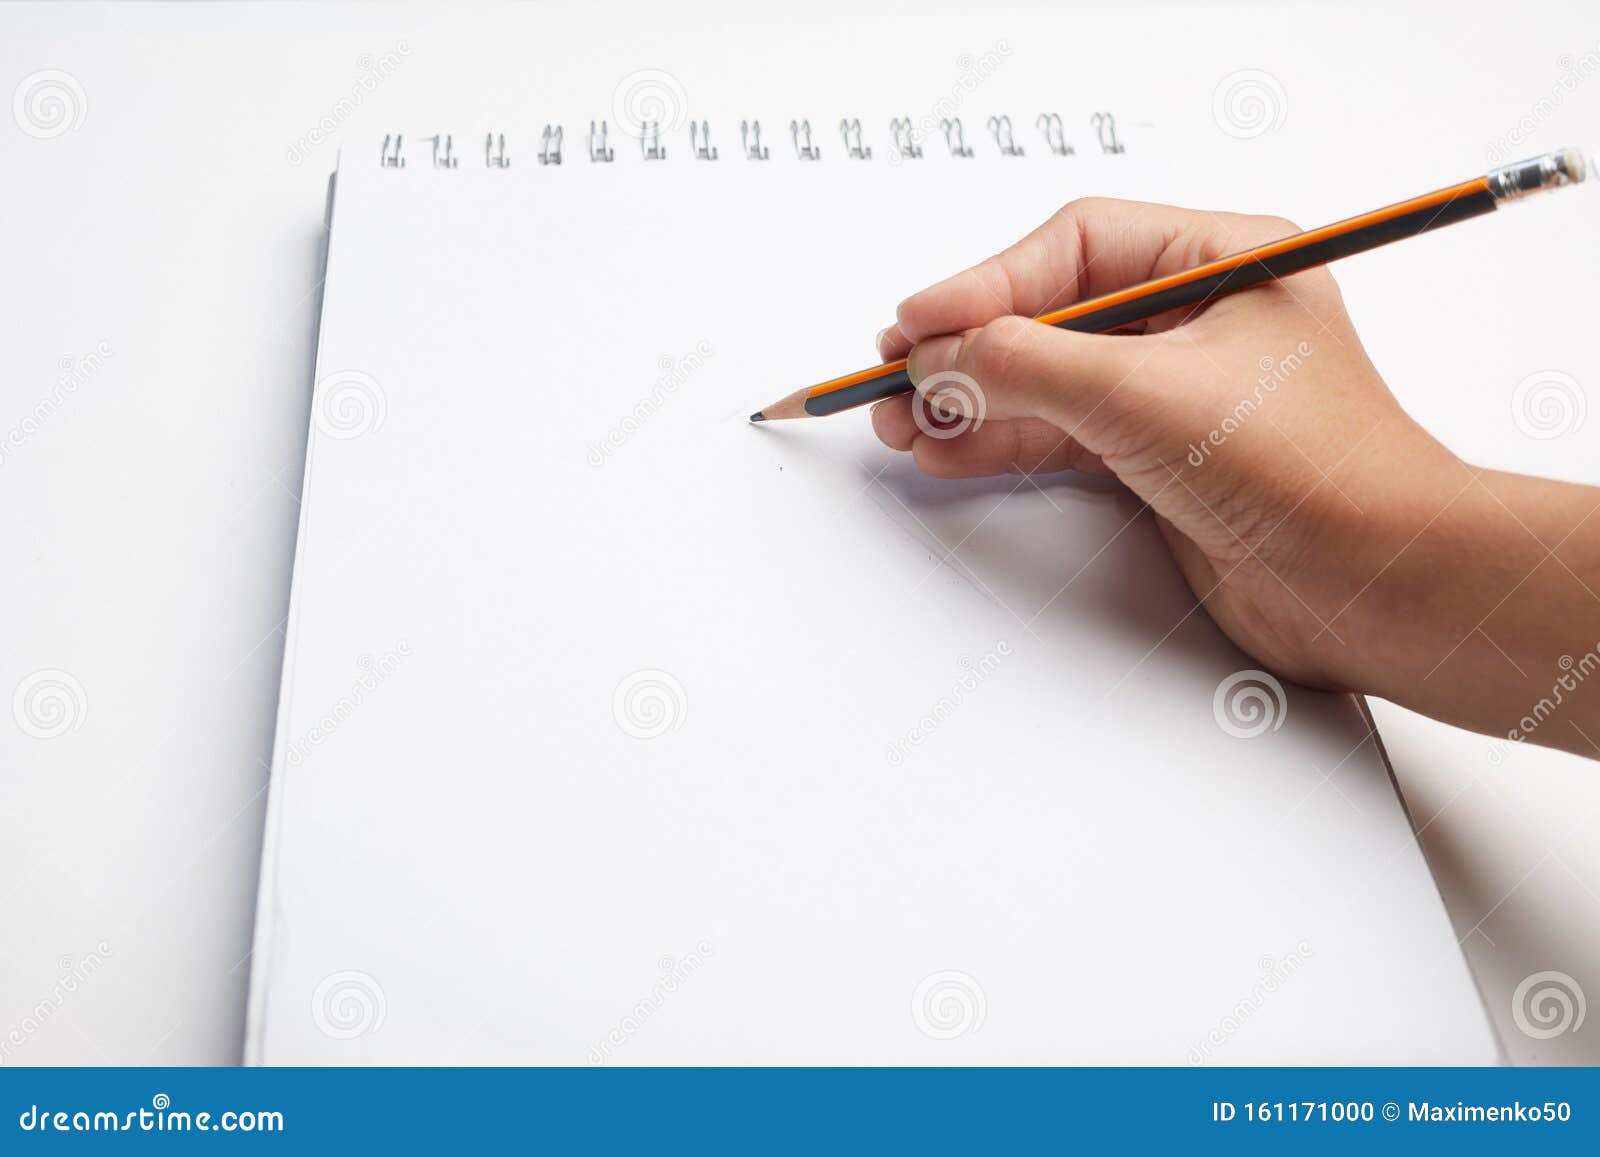 Hand Holding Pen Writing On Blank White Paper. Hand Write In The